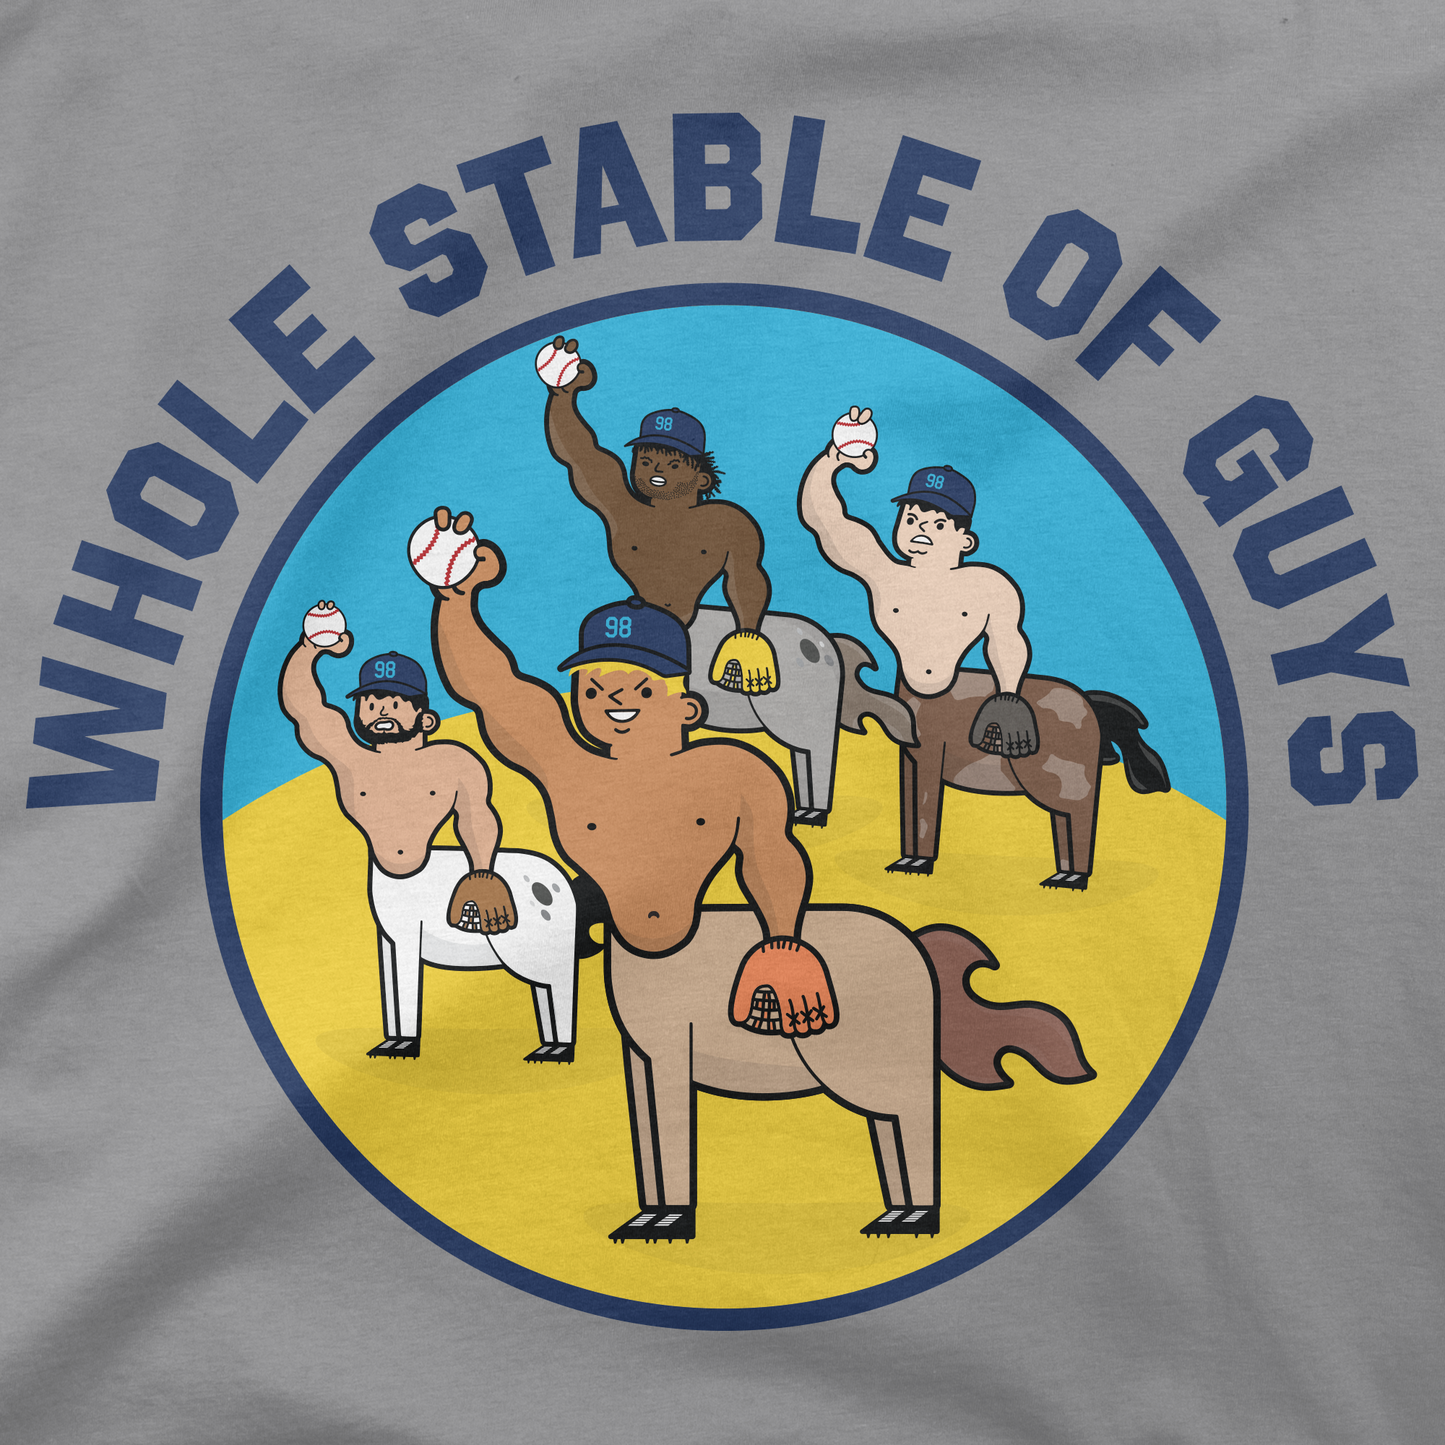 Whole Stable Of Guys | T-Shirt